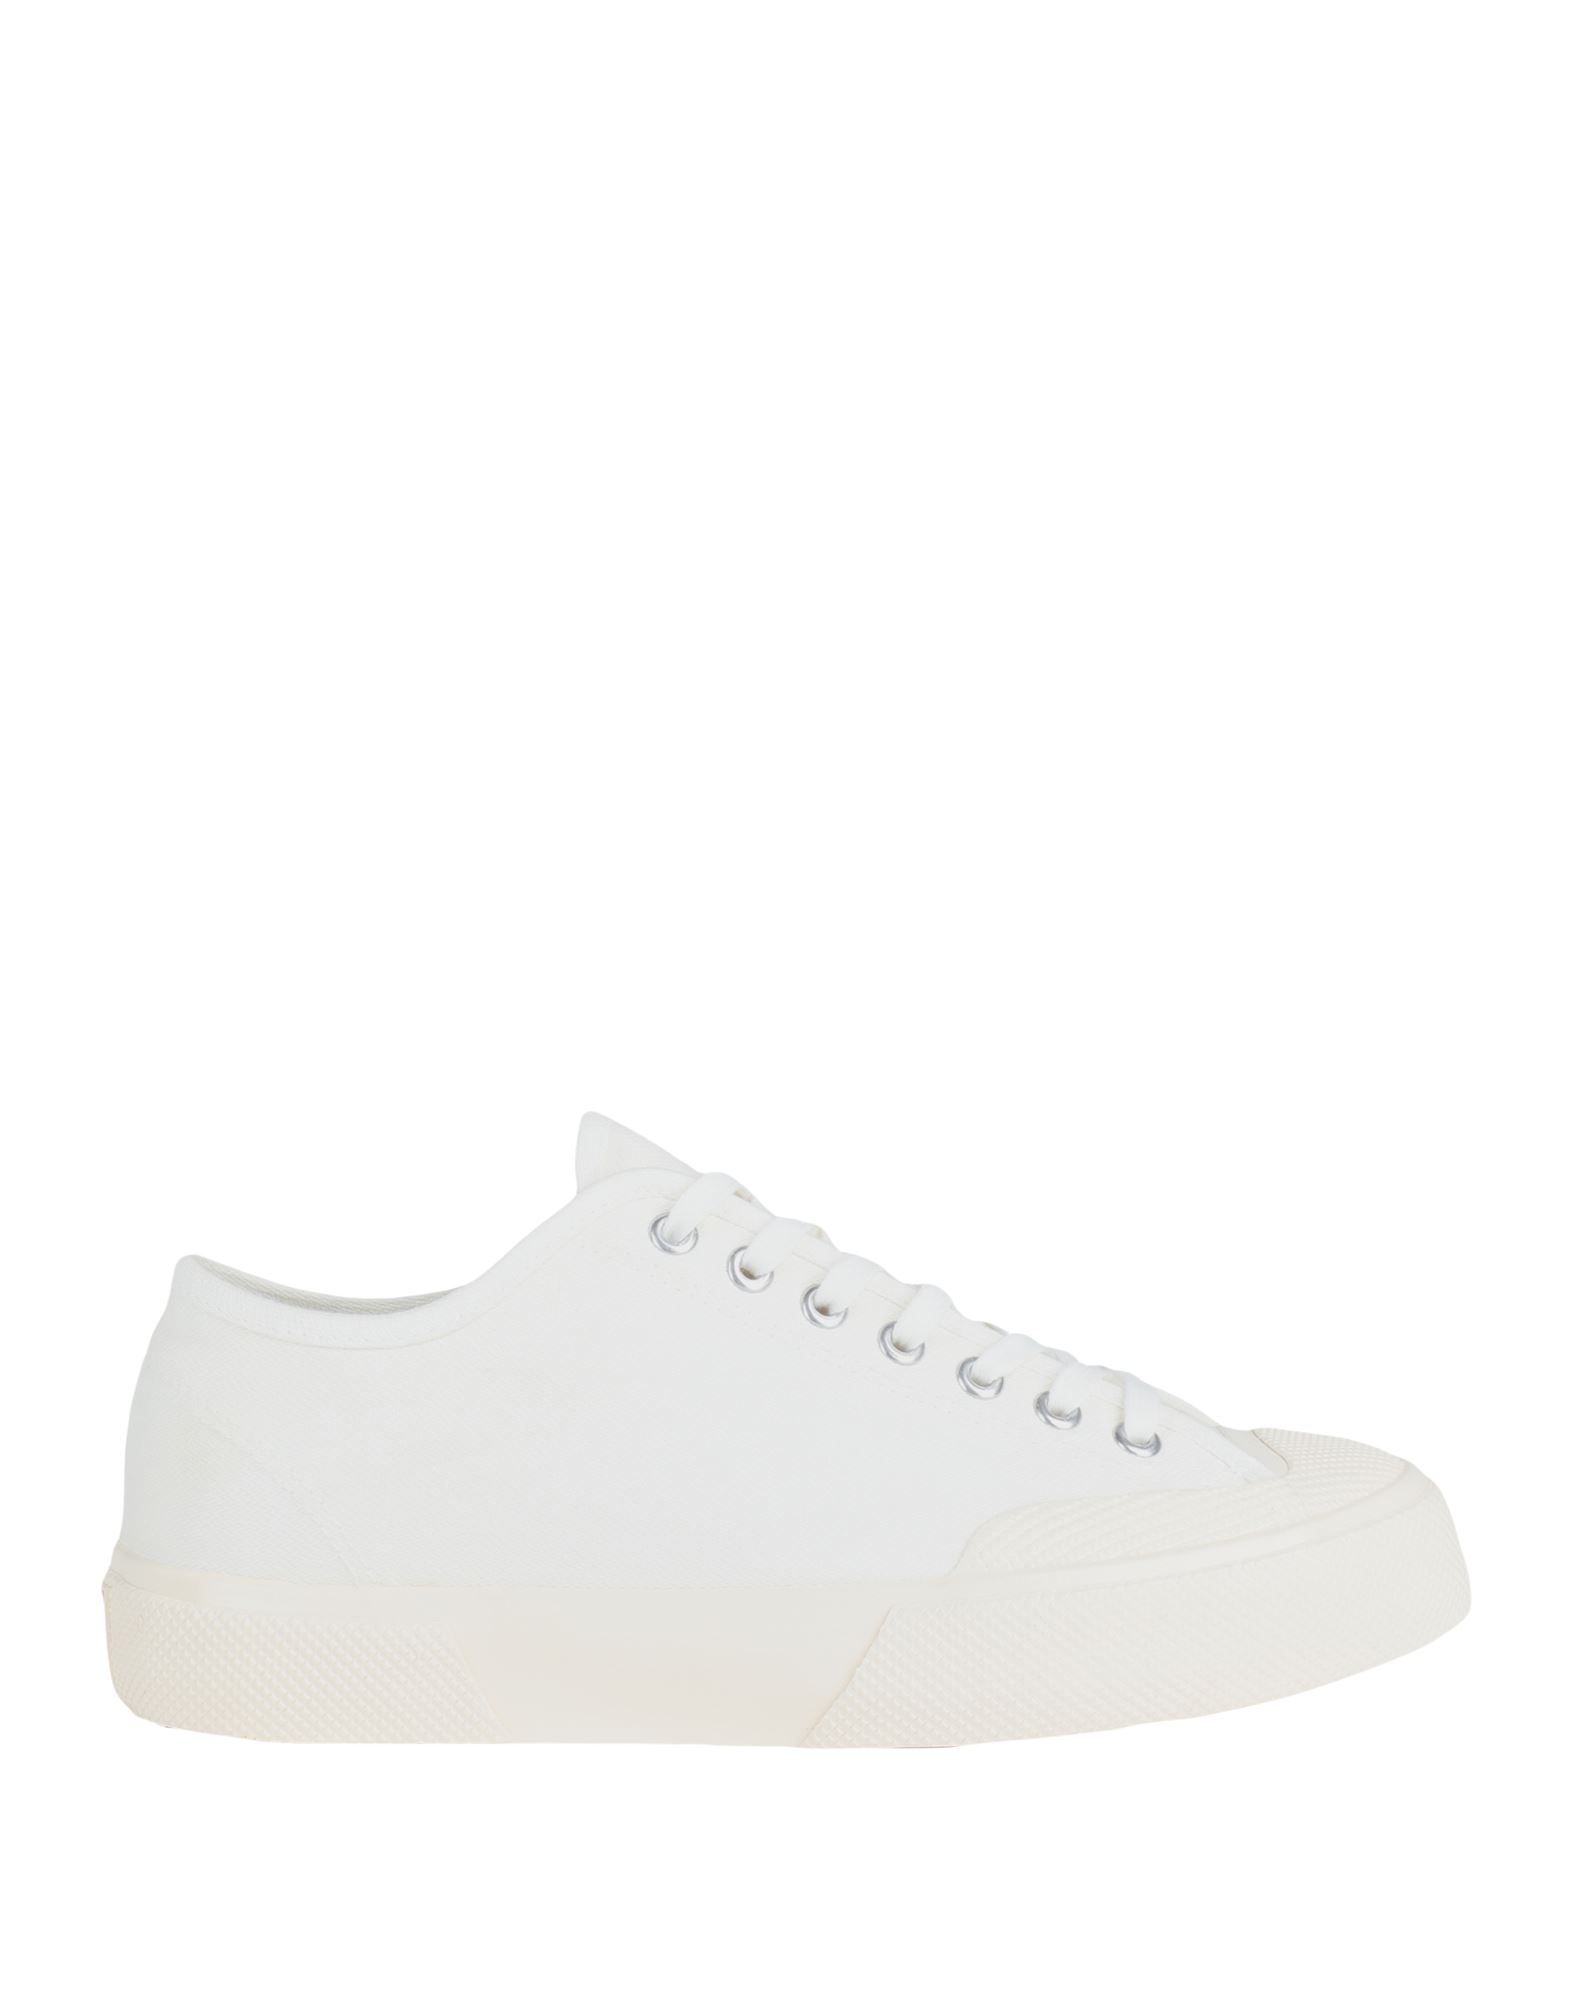 Artifact By Superga Sneakers In White